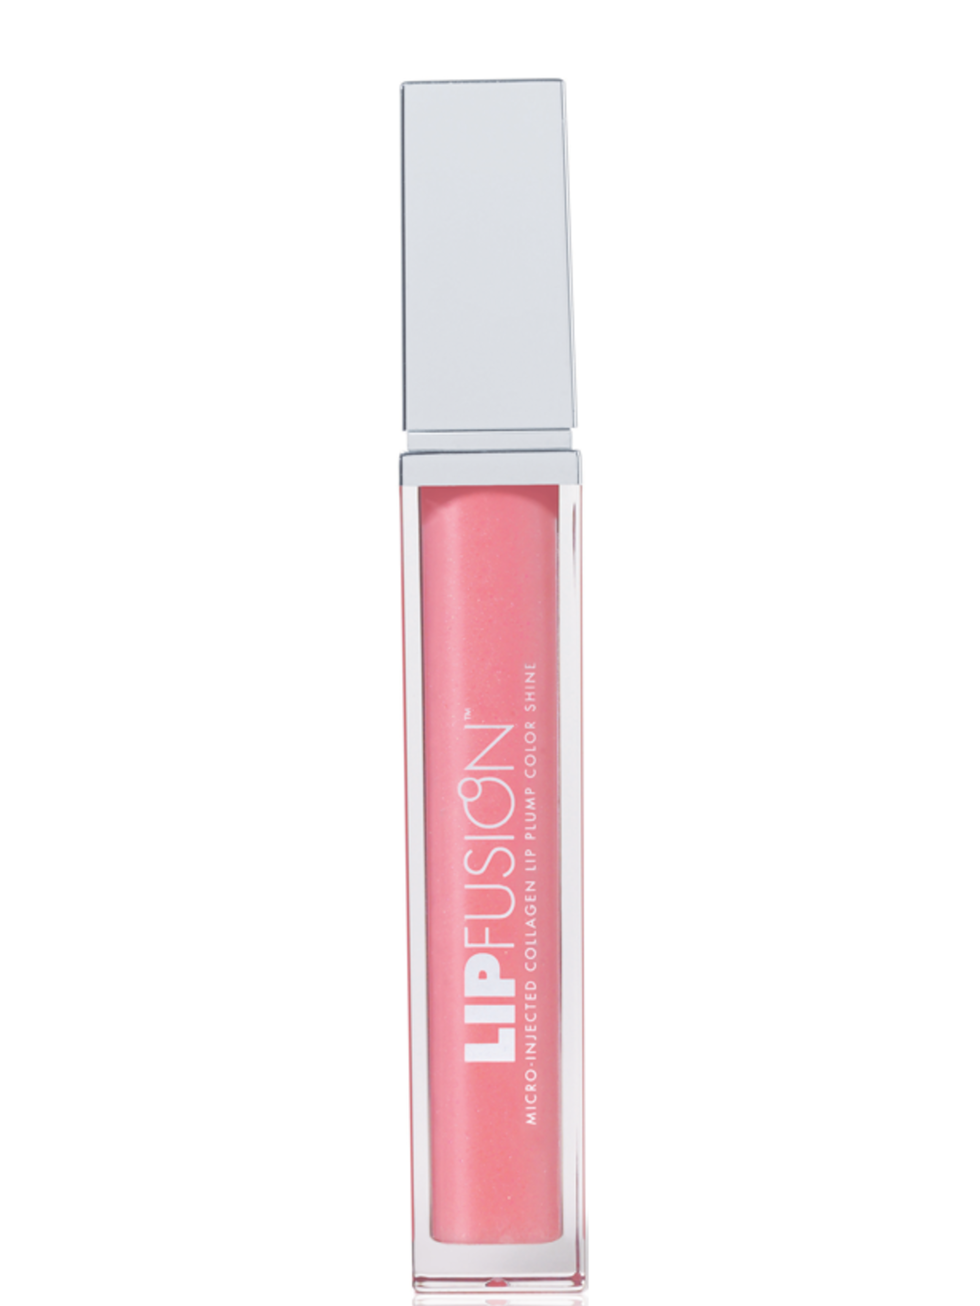 <p>Lip Plump Gloss, £25 by Lip Fusion at <a href="http://www.hqhair.com/code/products.asp?PageID=659&amp;SectionID=742&amp;FeaturedProduct=10597&amp;pID=1">HQhair</a></p><p>Containing marine collagen this gloss gives lips a plumper, fuller appearance - it